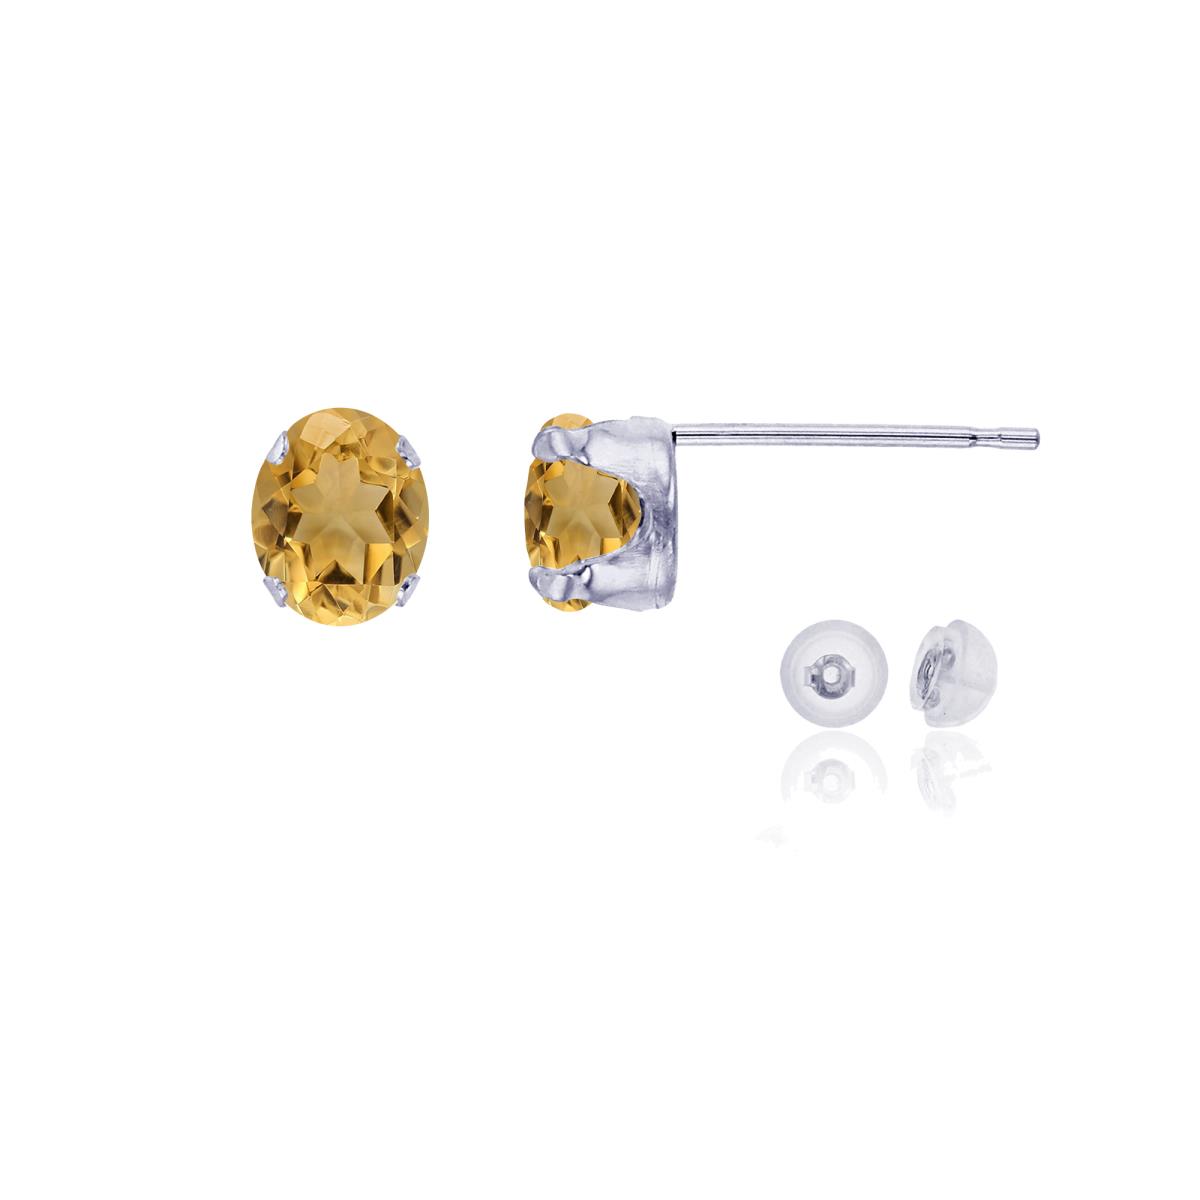 10K White Gold 6x4mm Oval Citrine Stud Earring with Silicone Back